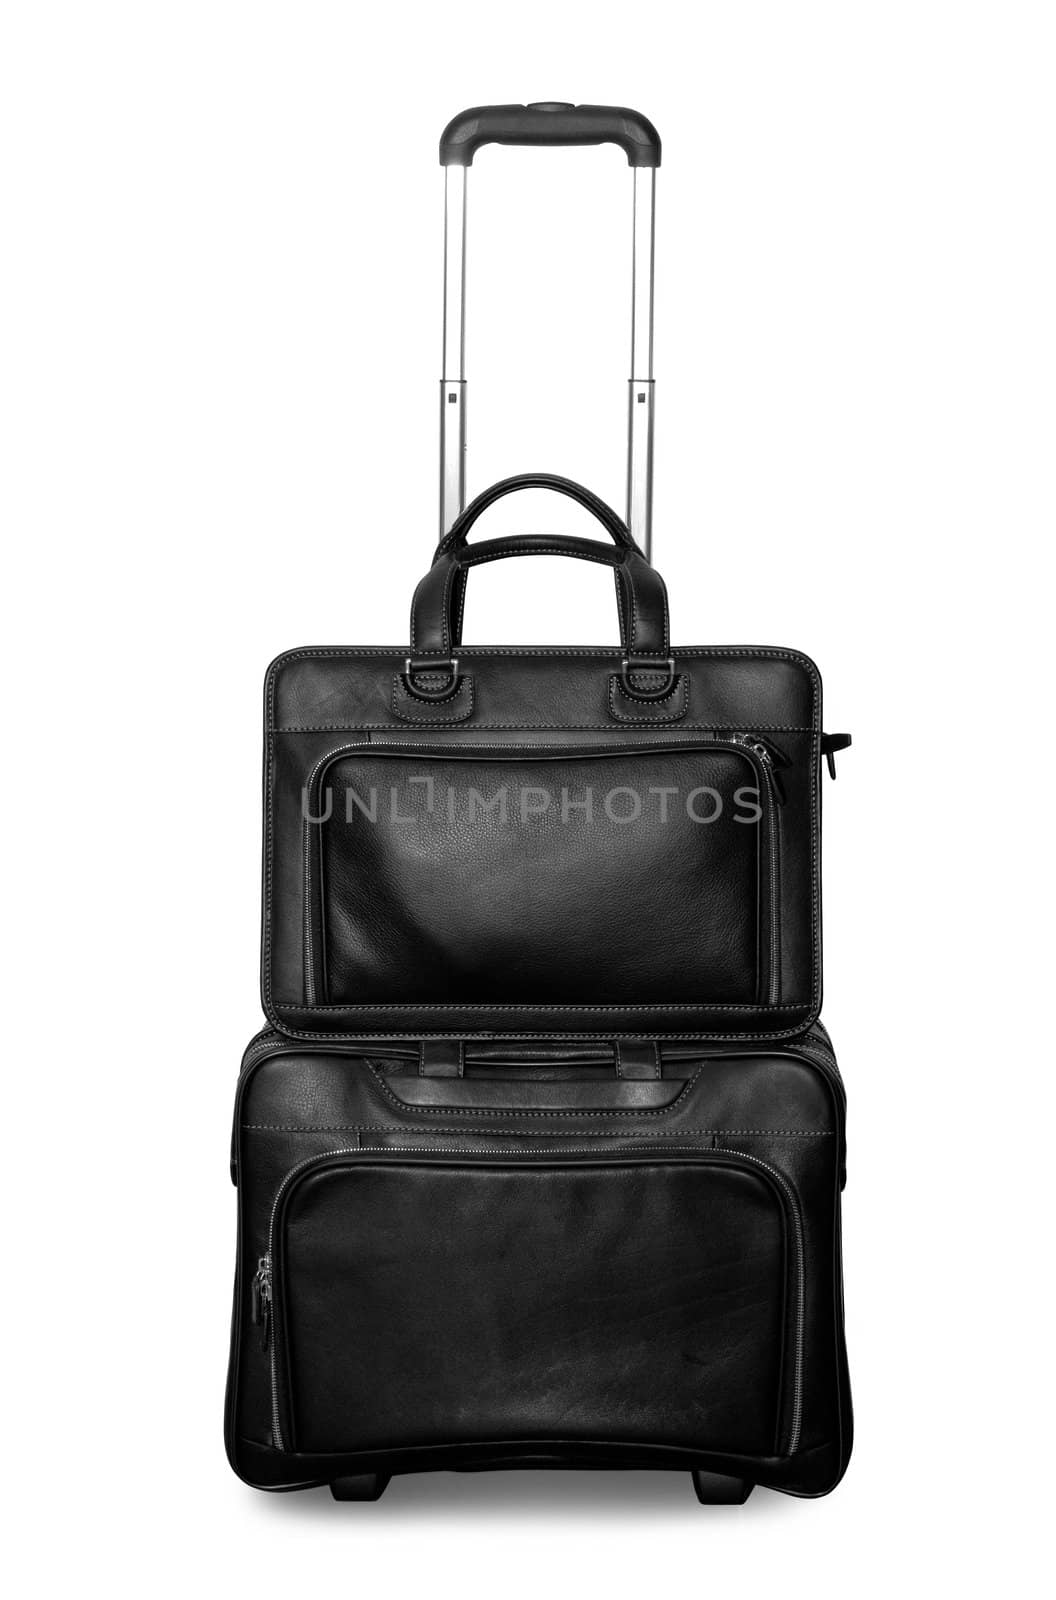 Travel or business bag isolated over white